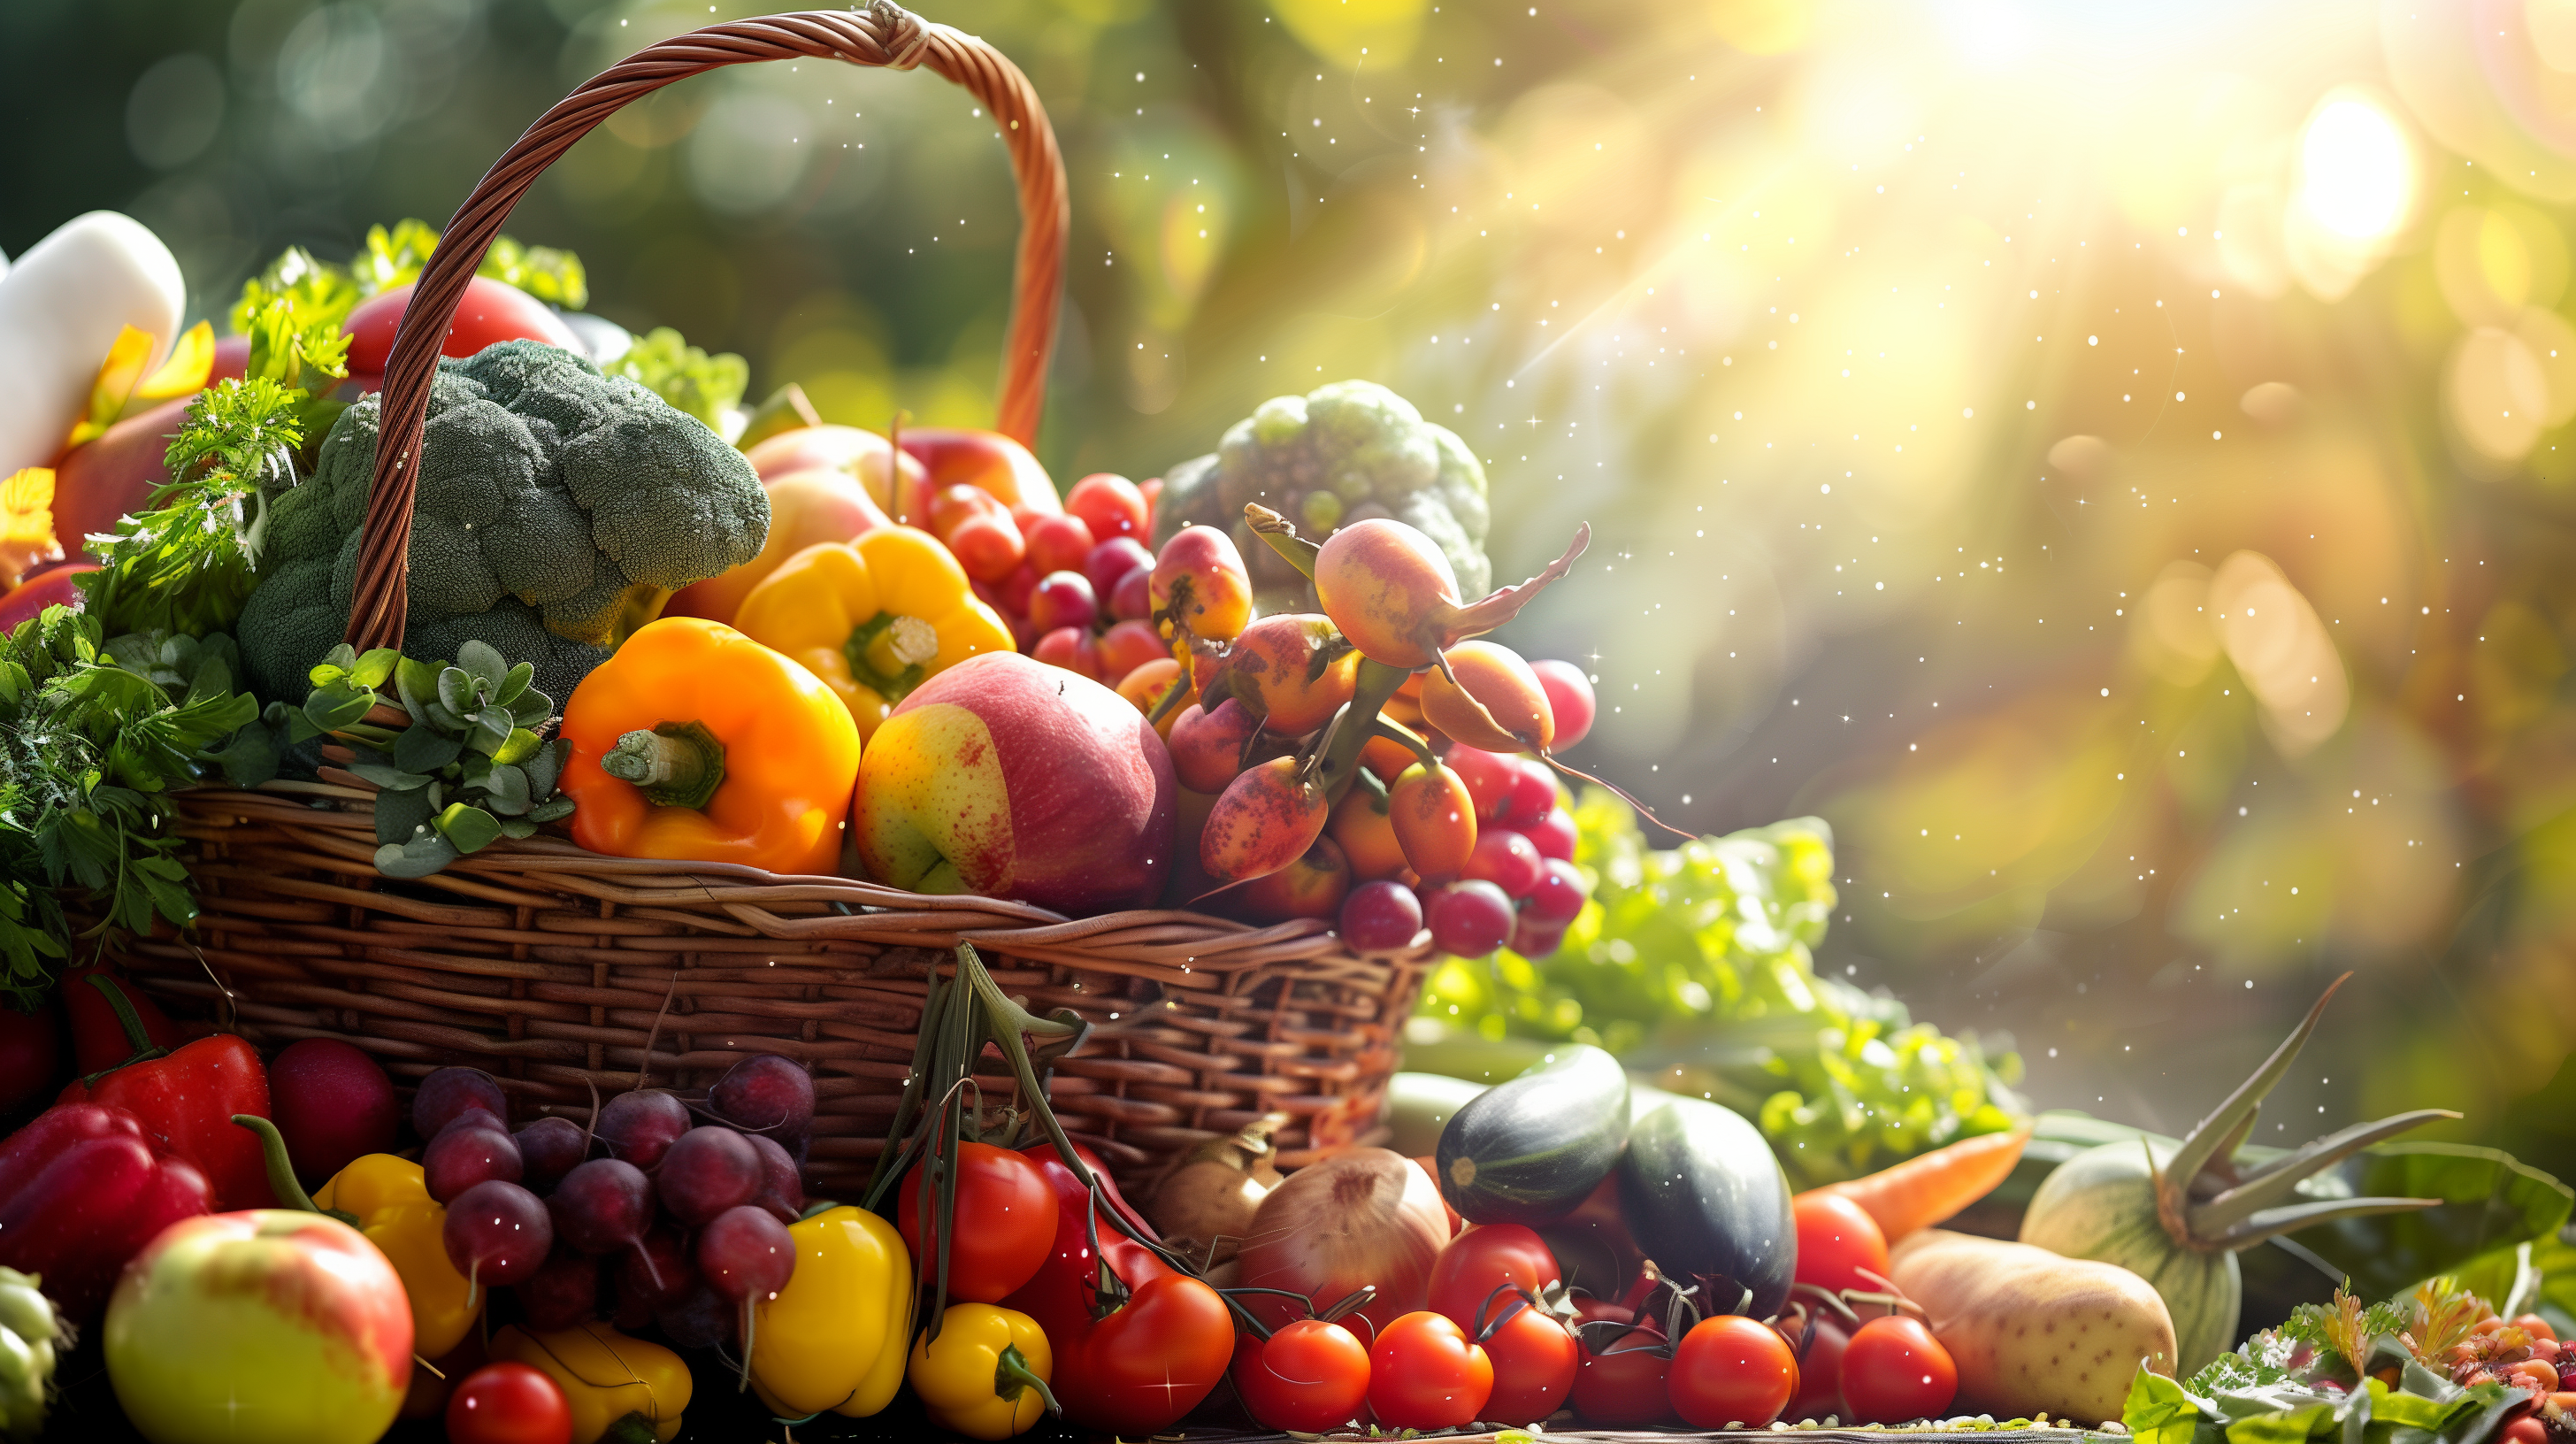 basket of fruits, vegetables, and herbs, with sunlight